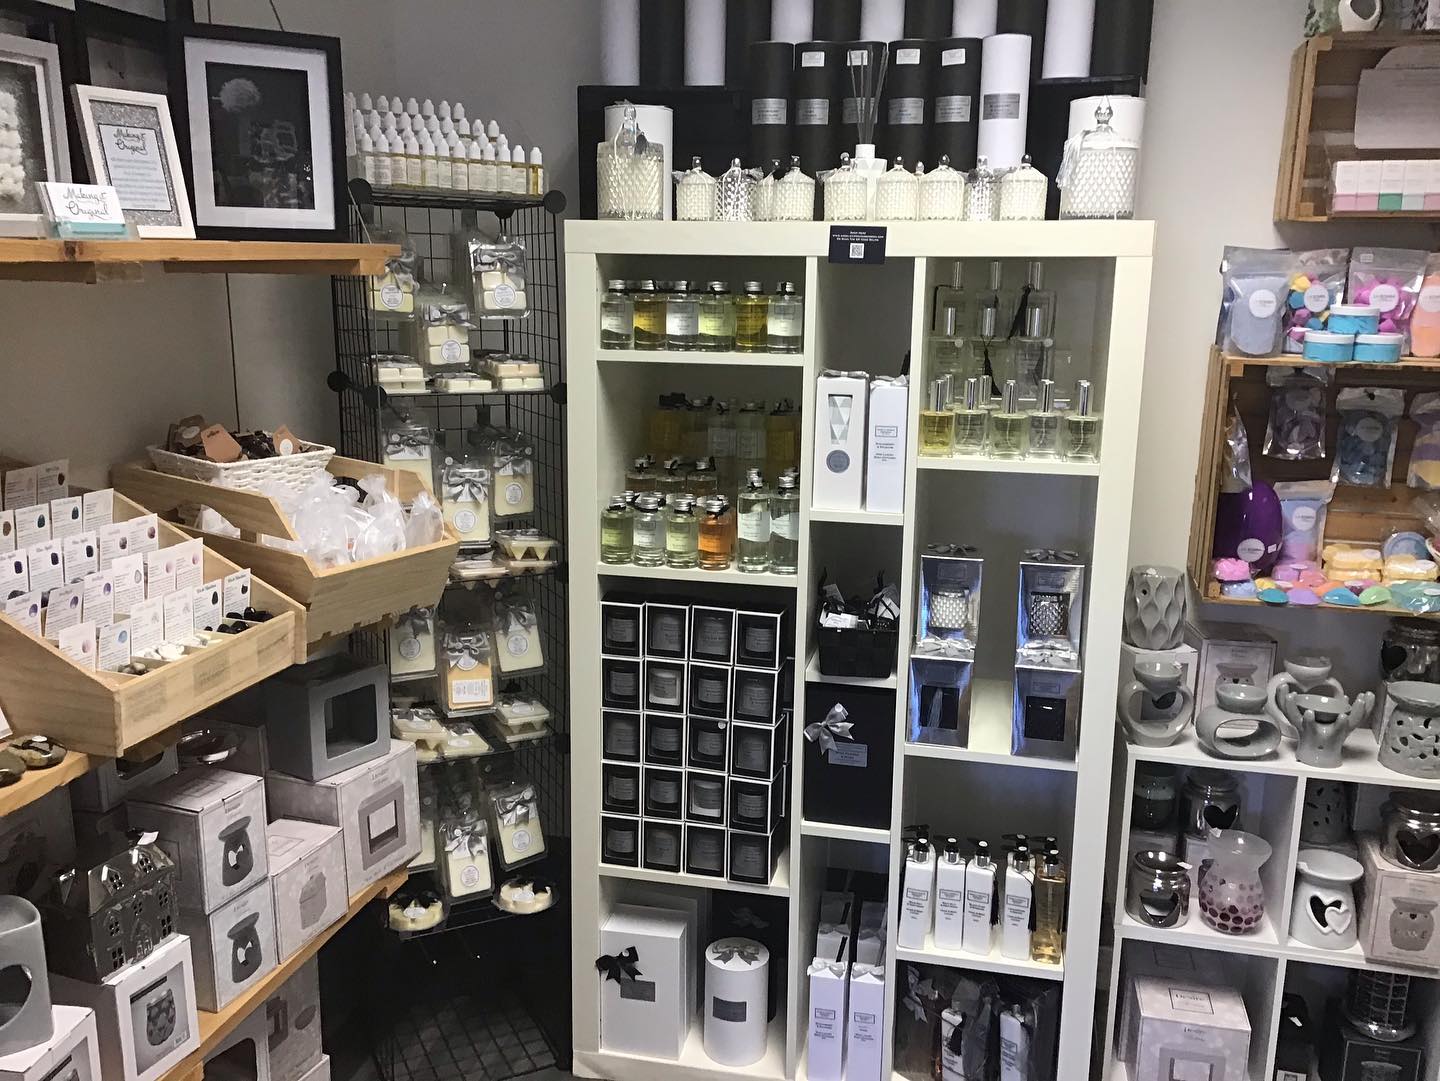 Selection of candles and room scents available at Myriad, Ellon